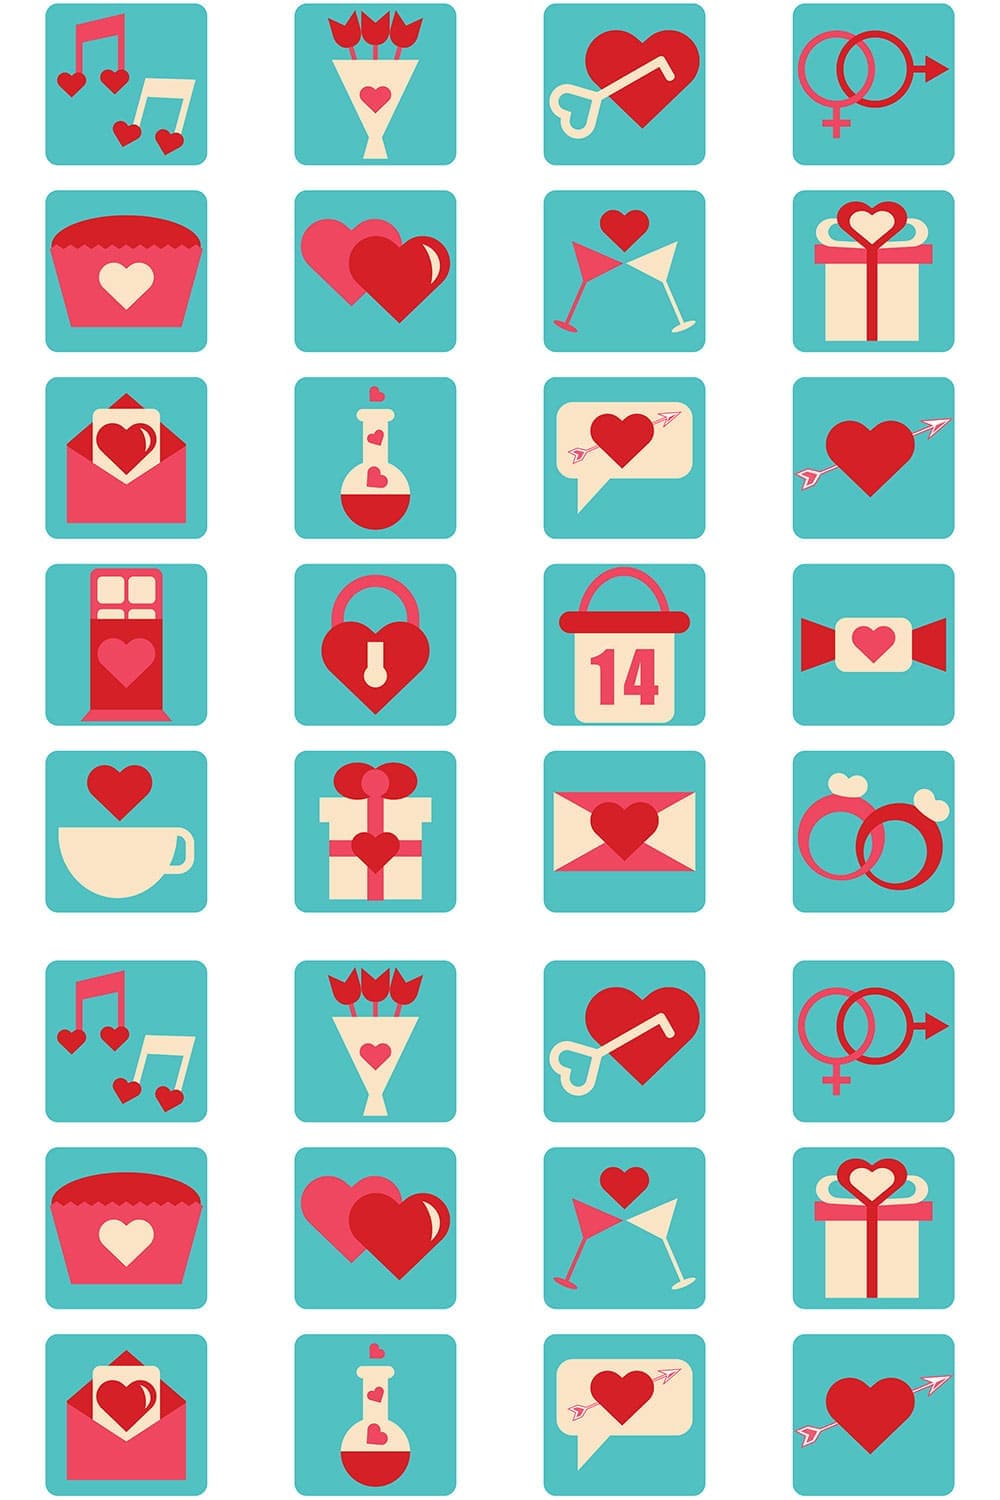 20 valentines day flat icons set, picture for pinterest.